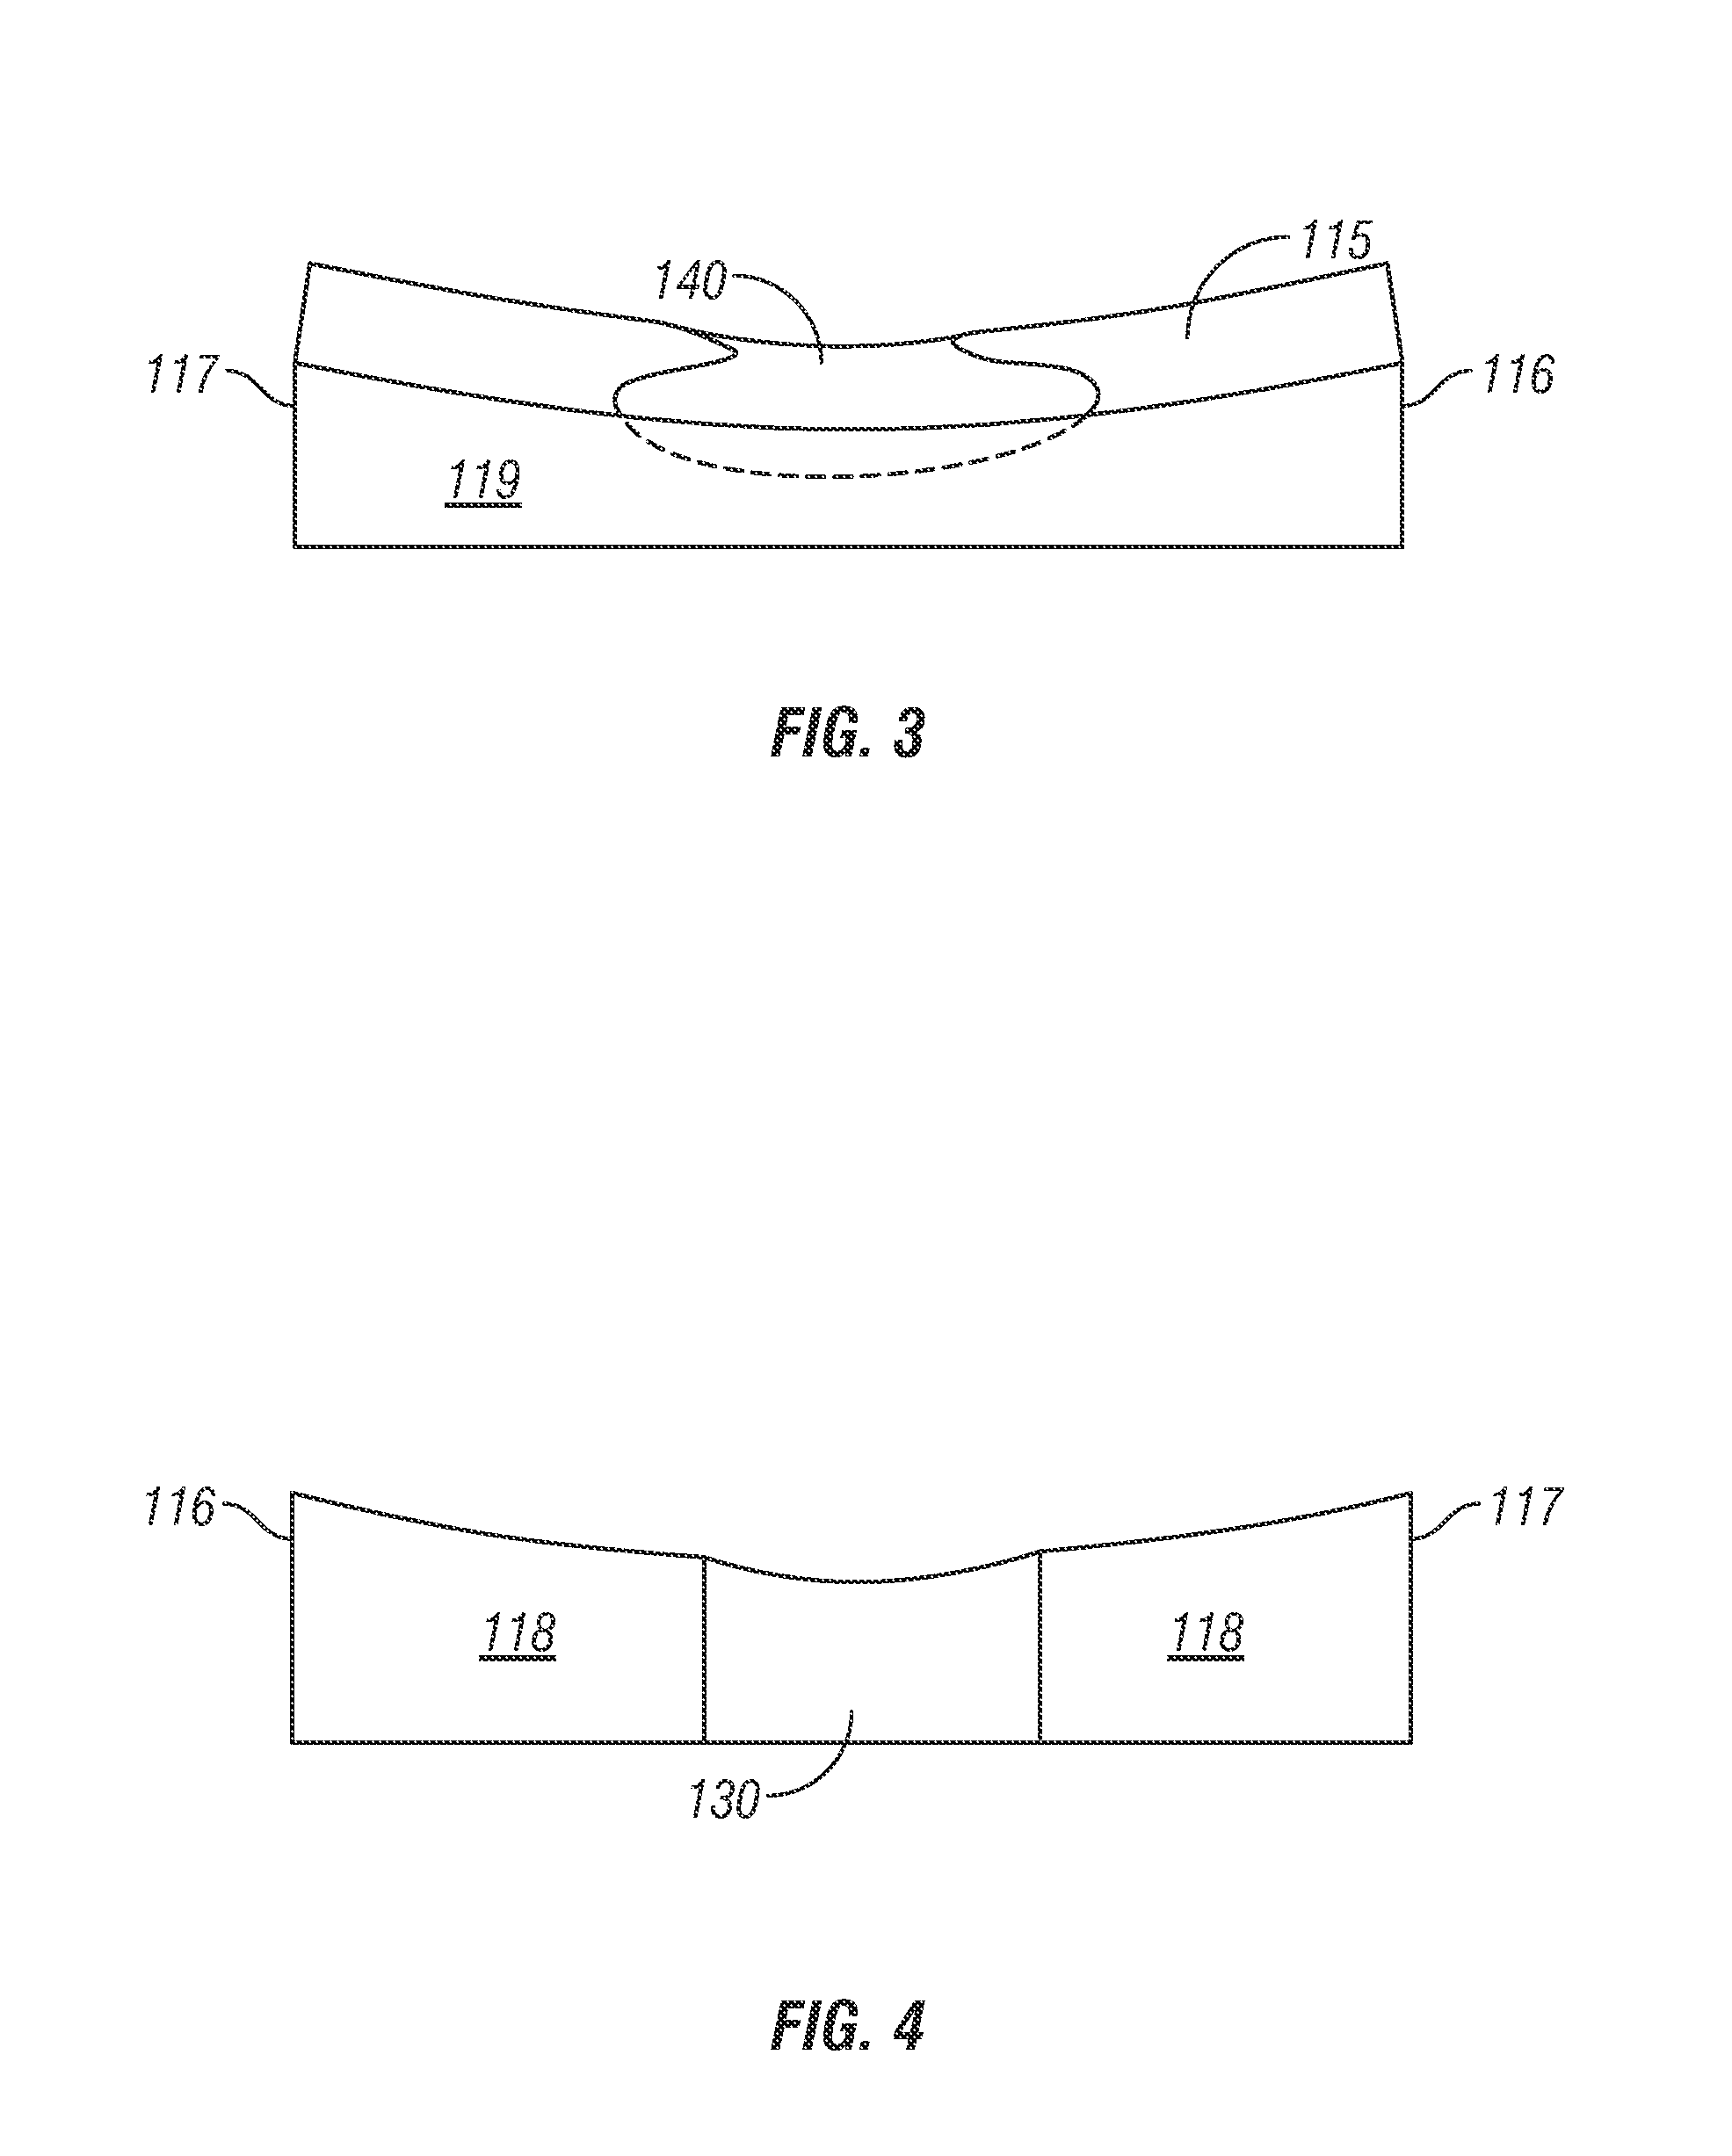 Pillow for Facilitating the Lateral Sniff Position for Improved Airway Management